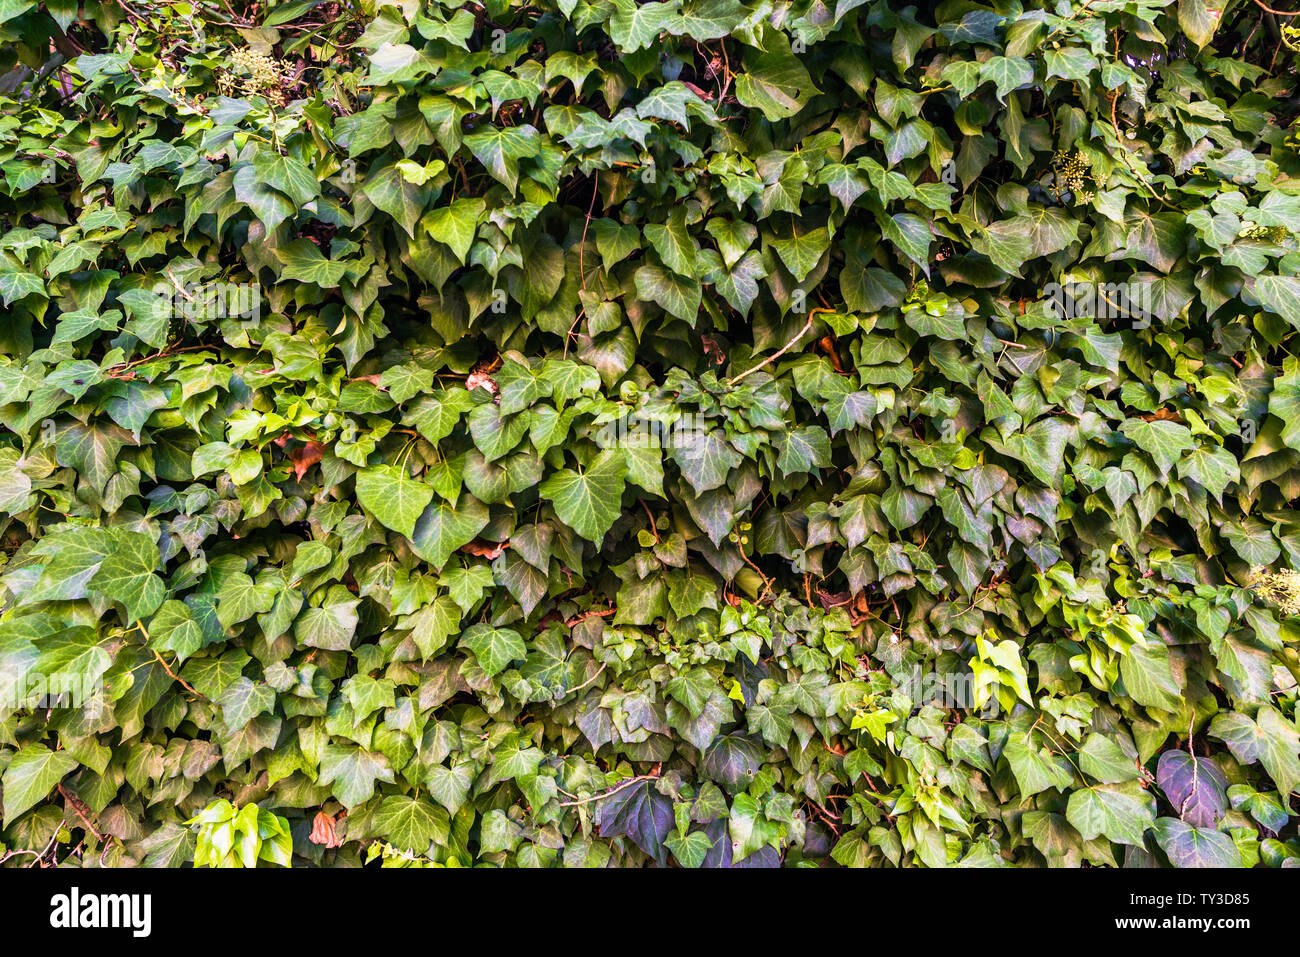 Background of green bright leaves. Photo stylized for film look Stock Photo